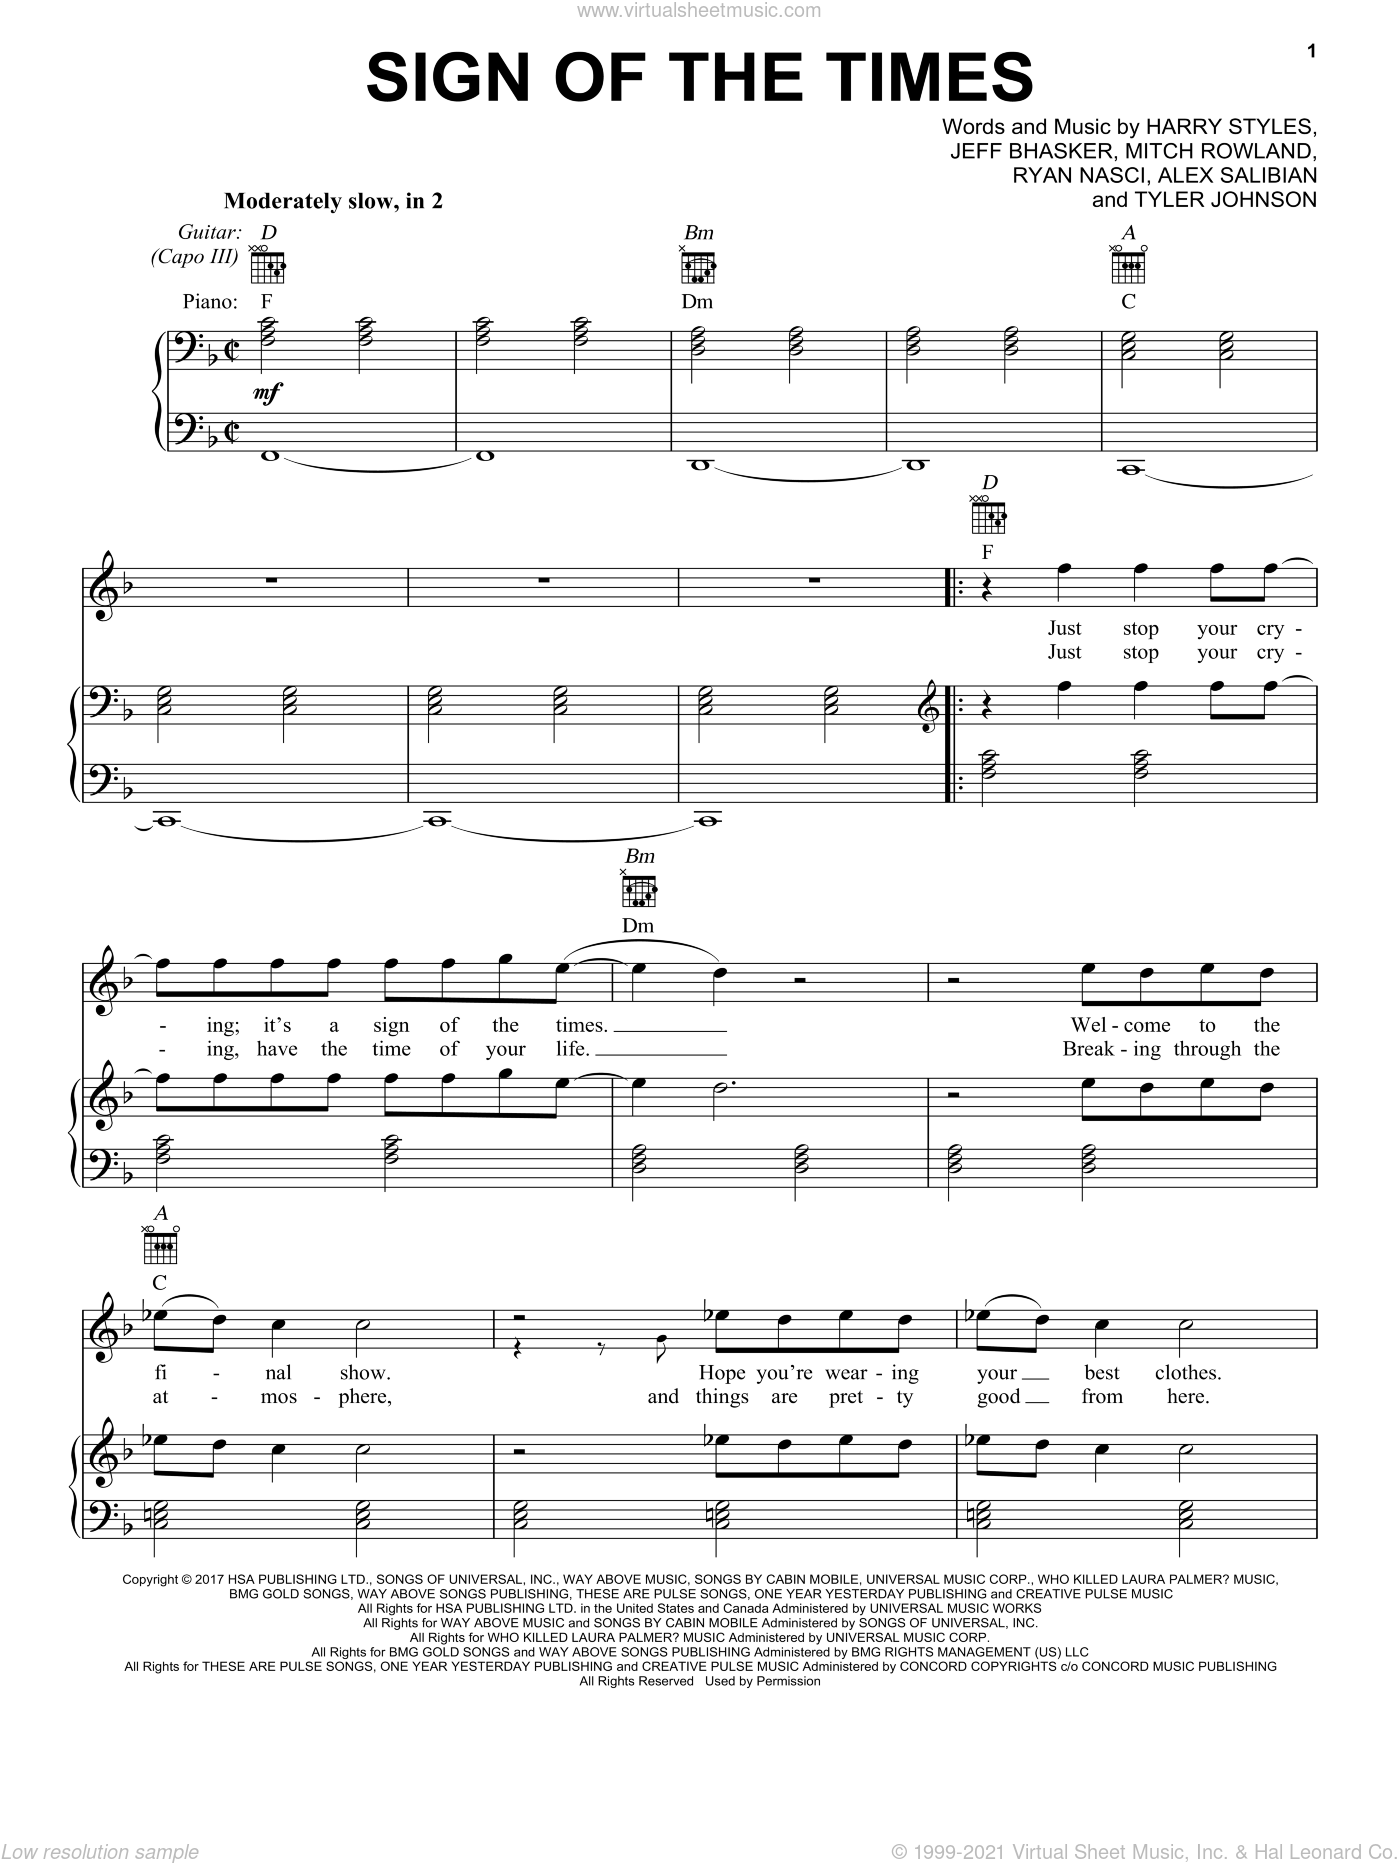 Styles - Sign Of The Times sheet music for voice, piano or guitar